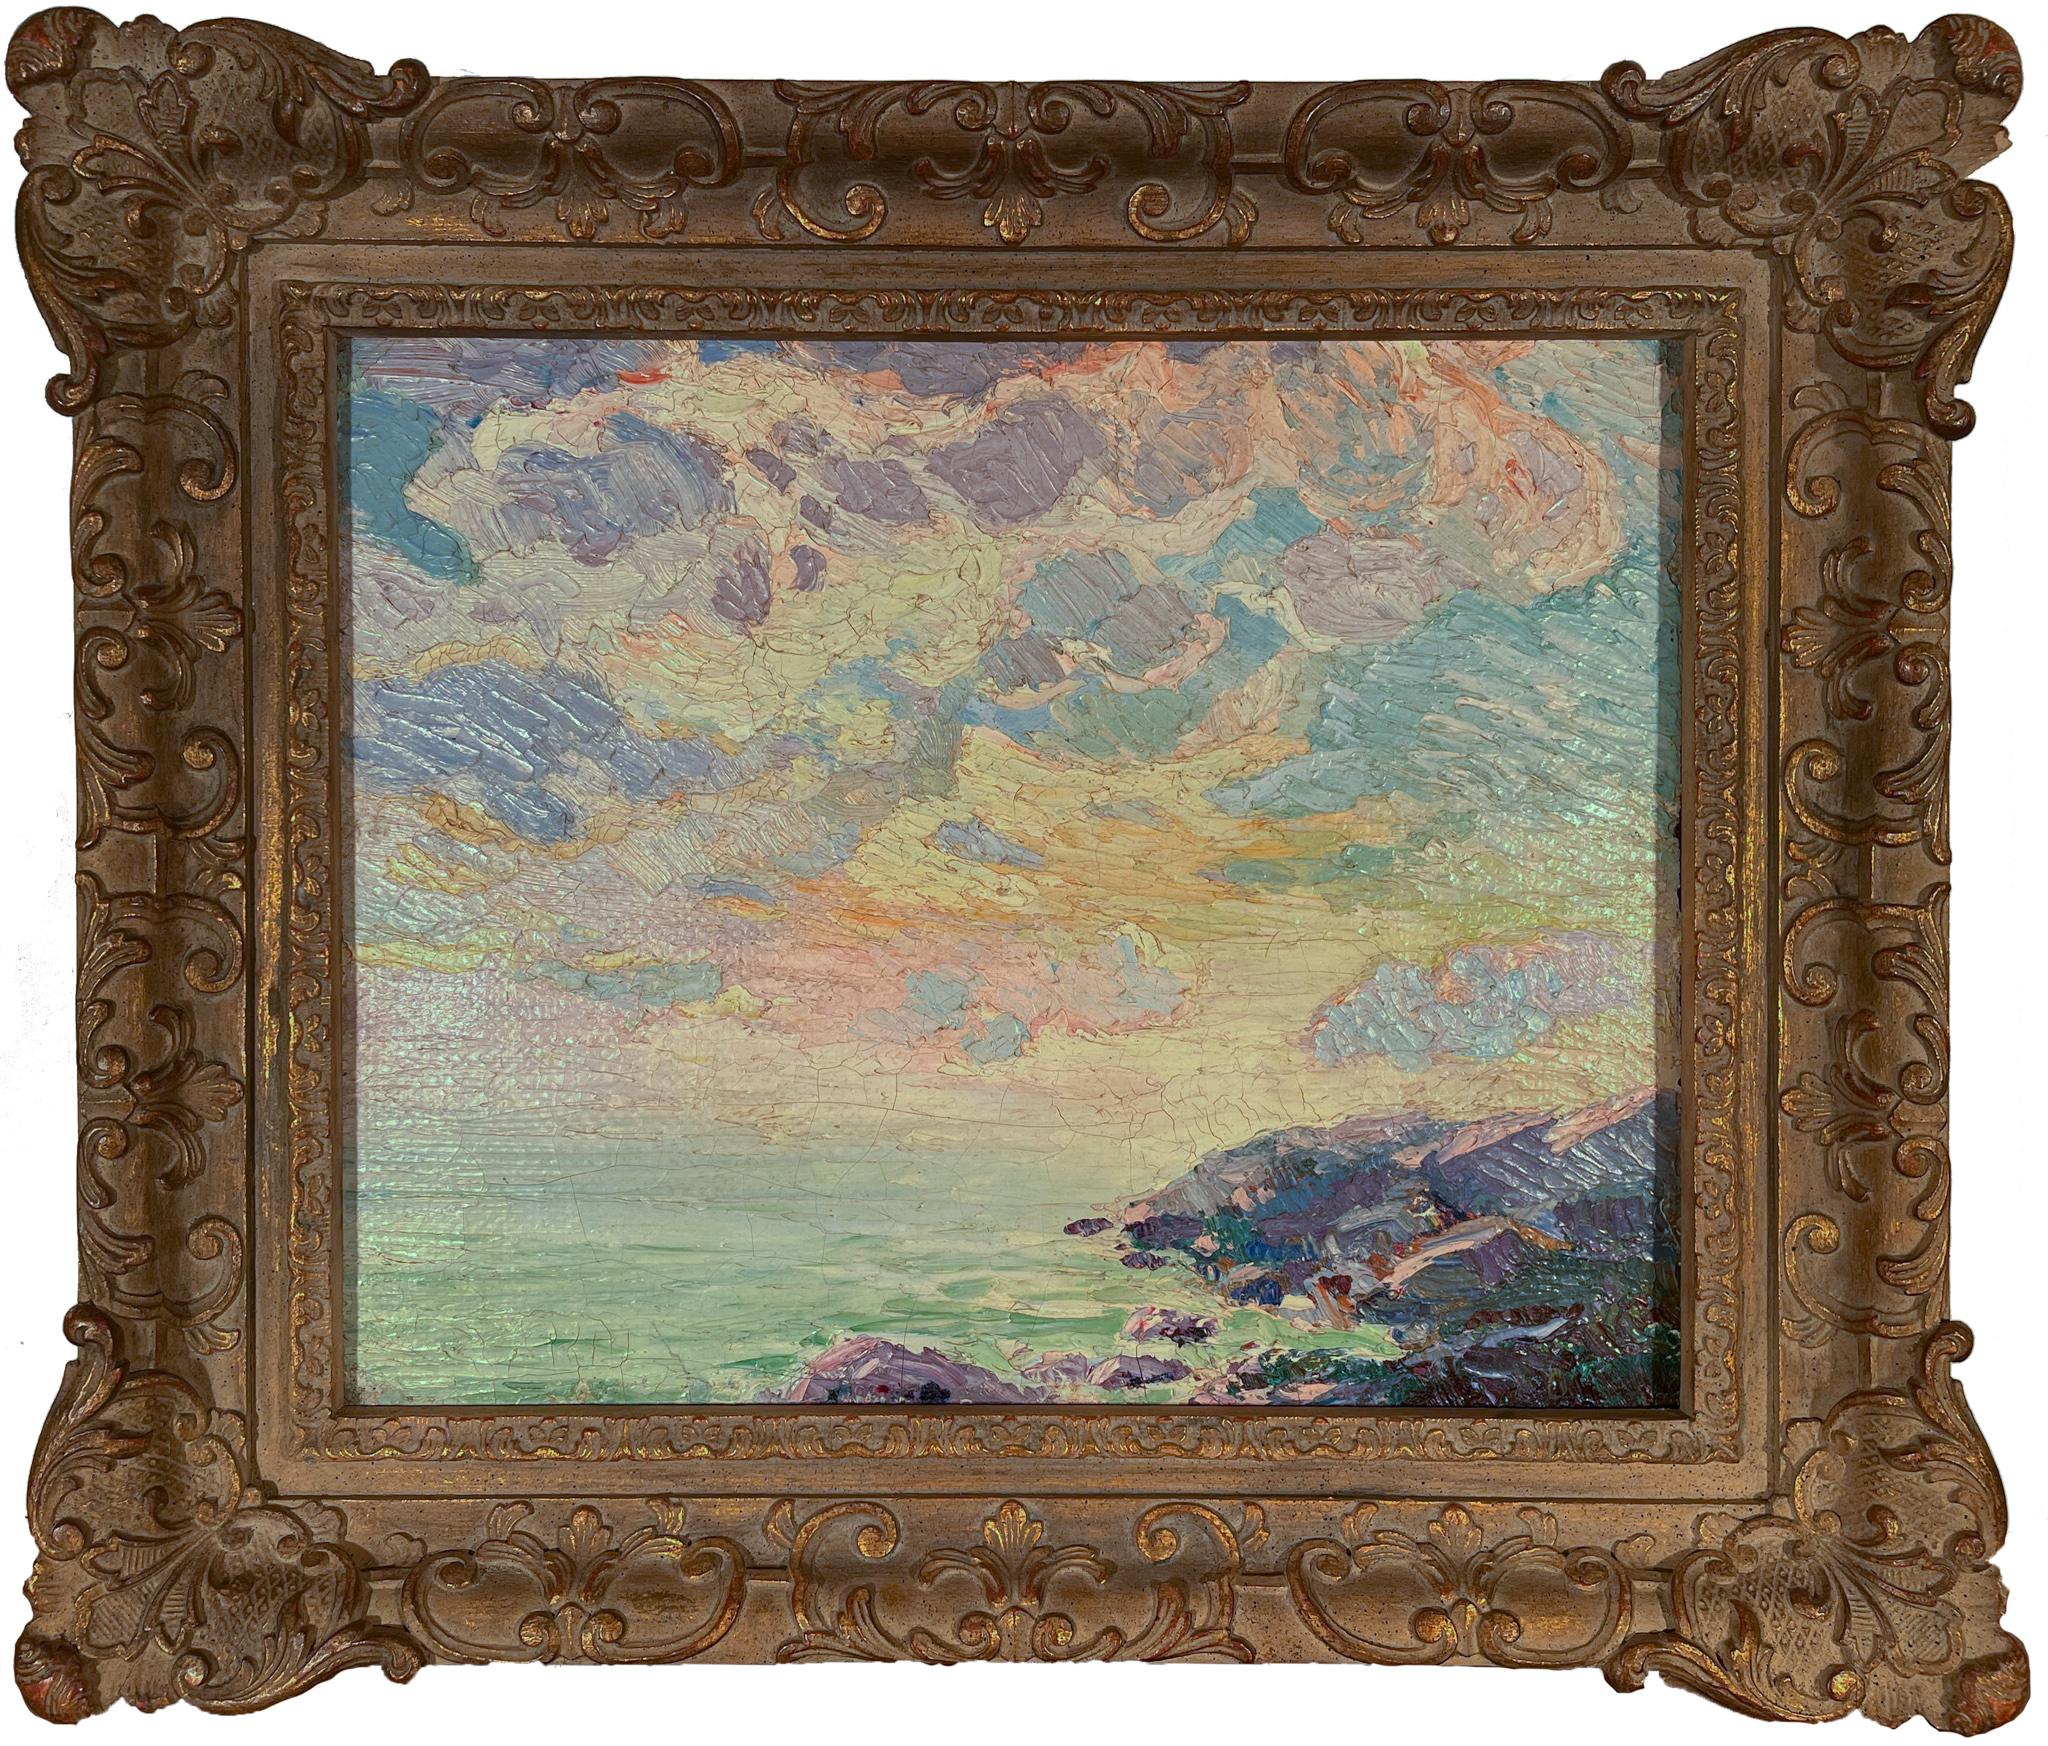 Seascape - Painting by Sigurd Solver Schou